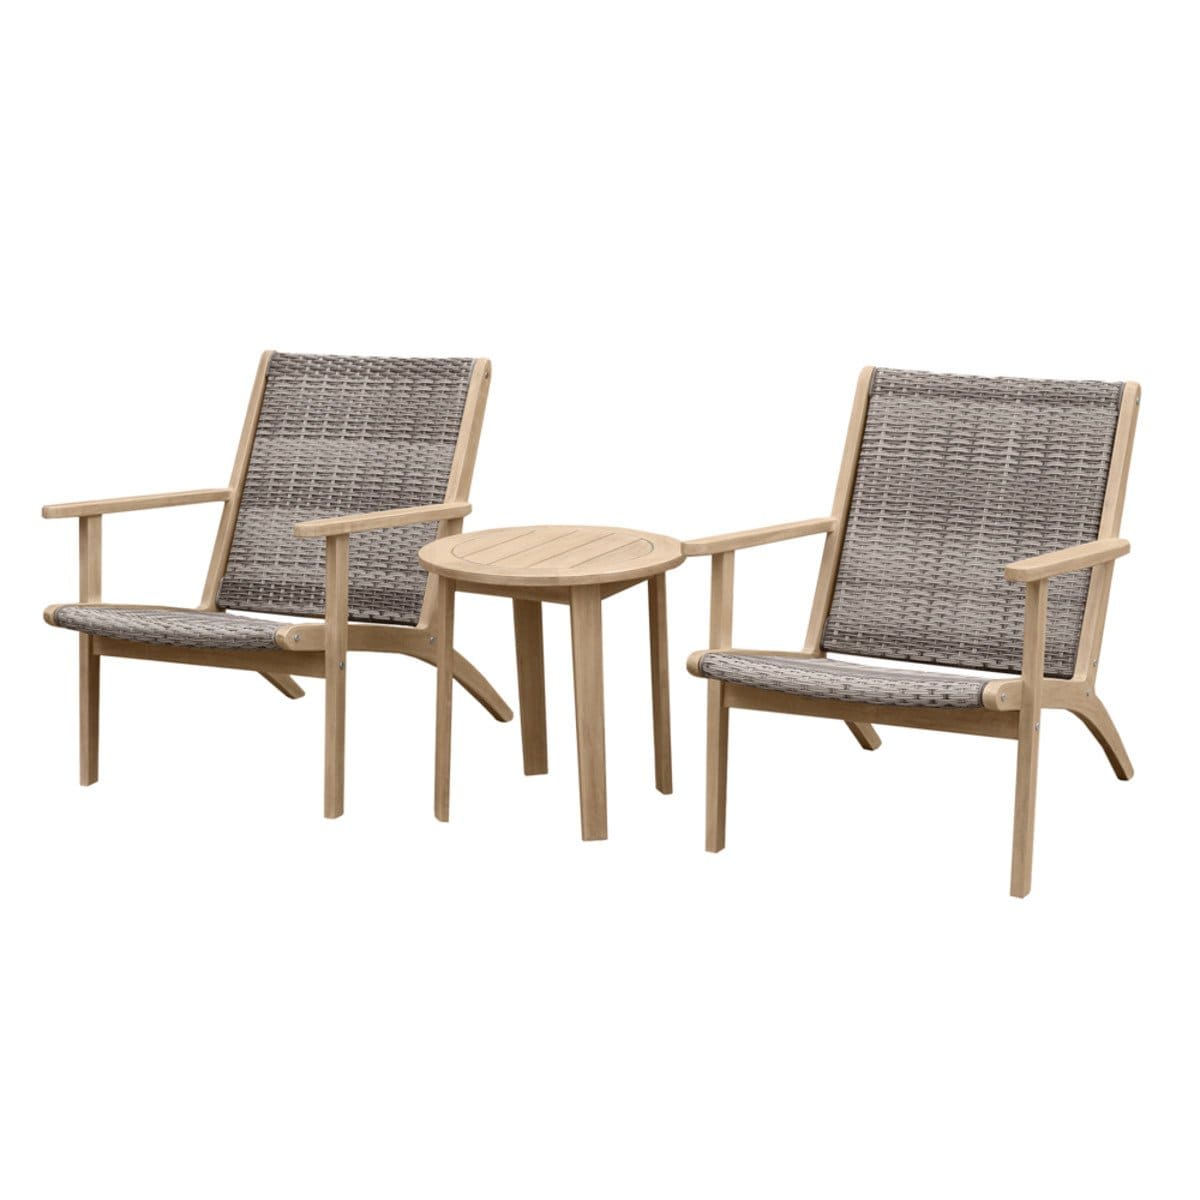 Recreation Outfitters Imani 3pc Seating Set